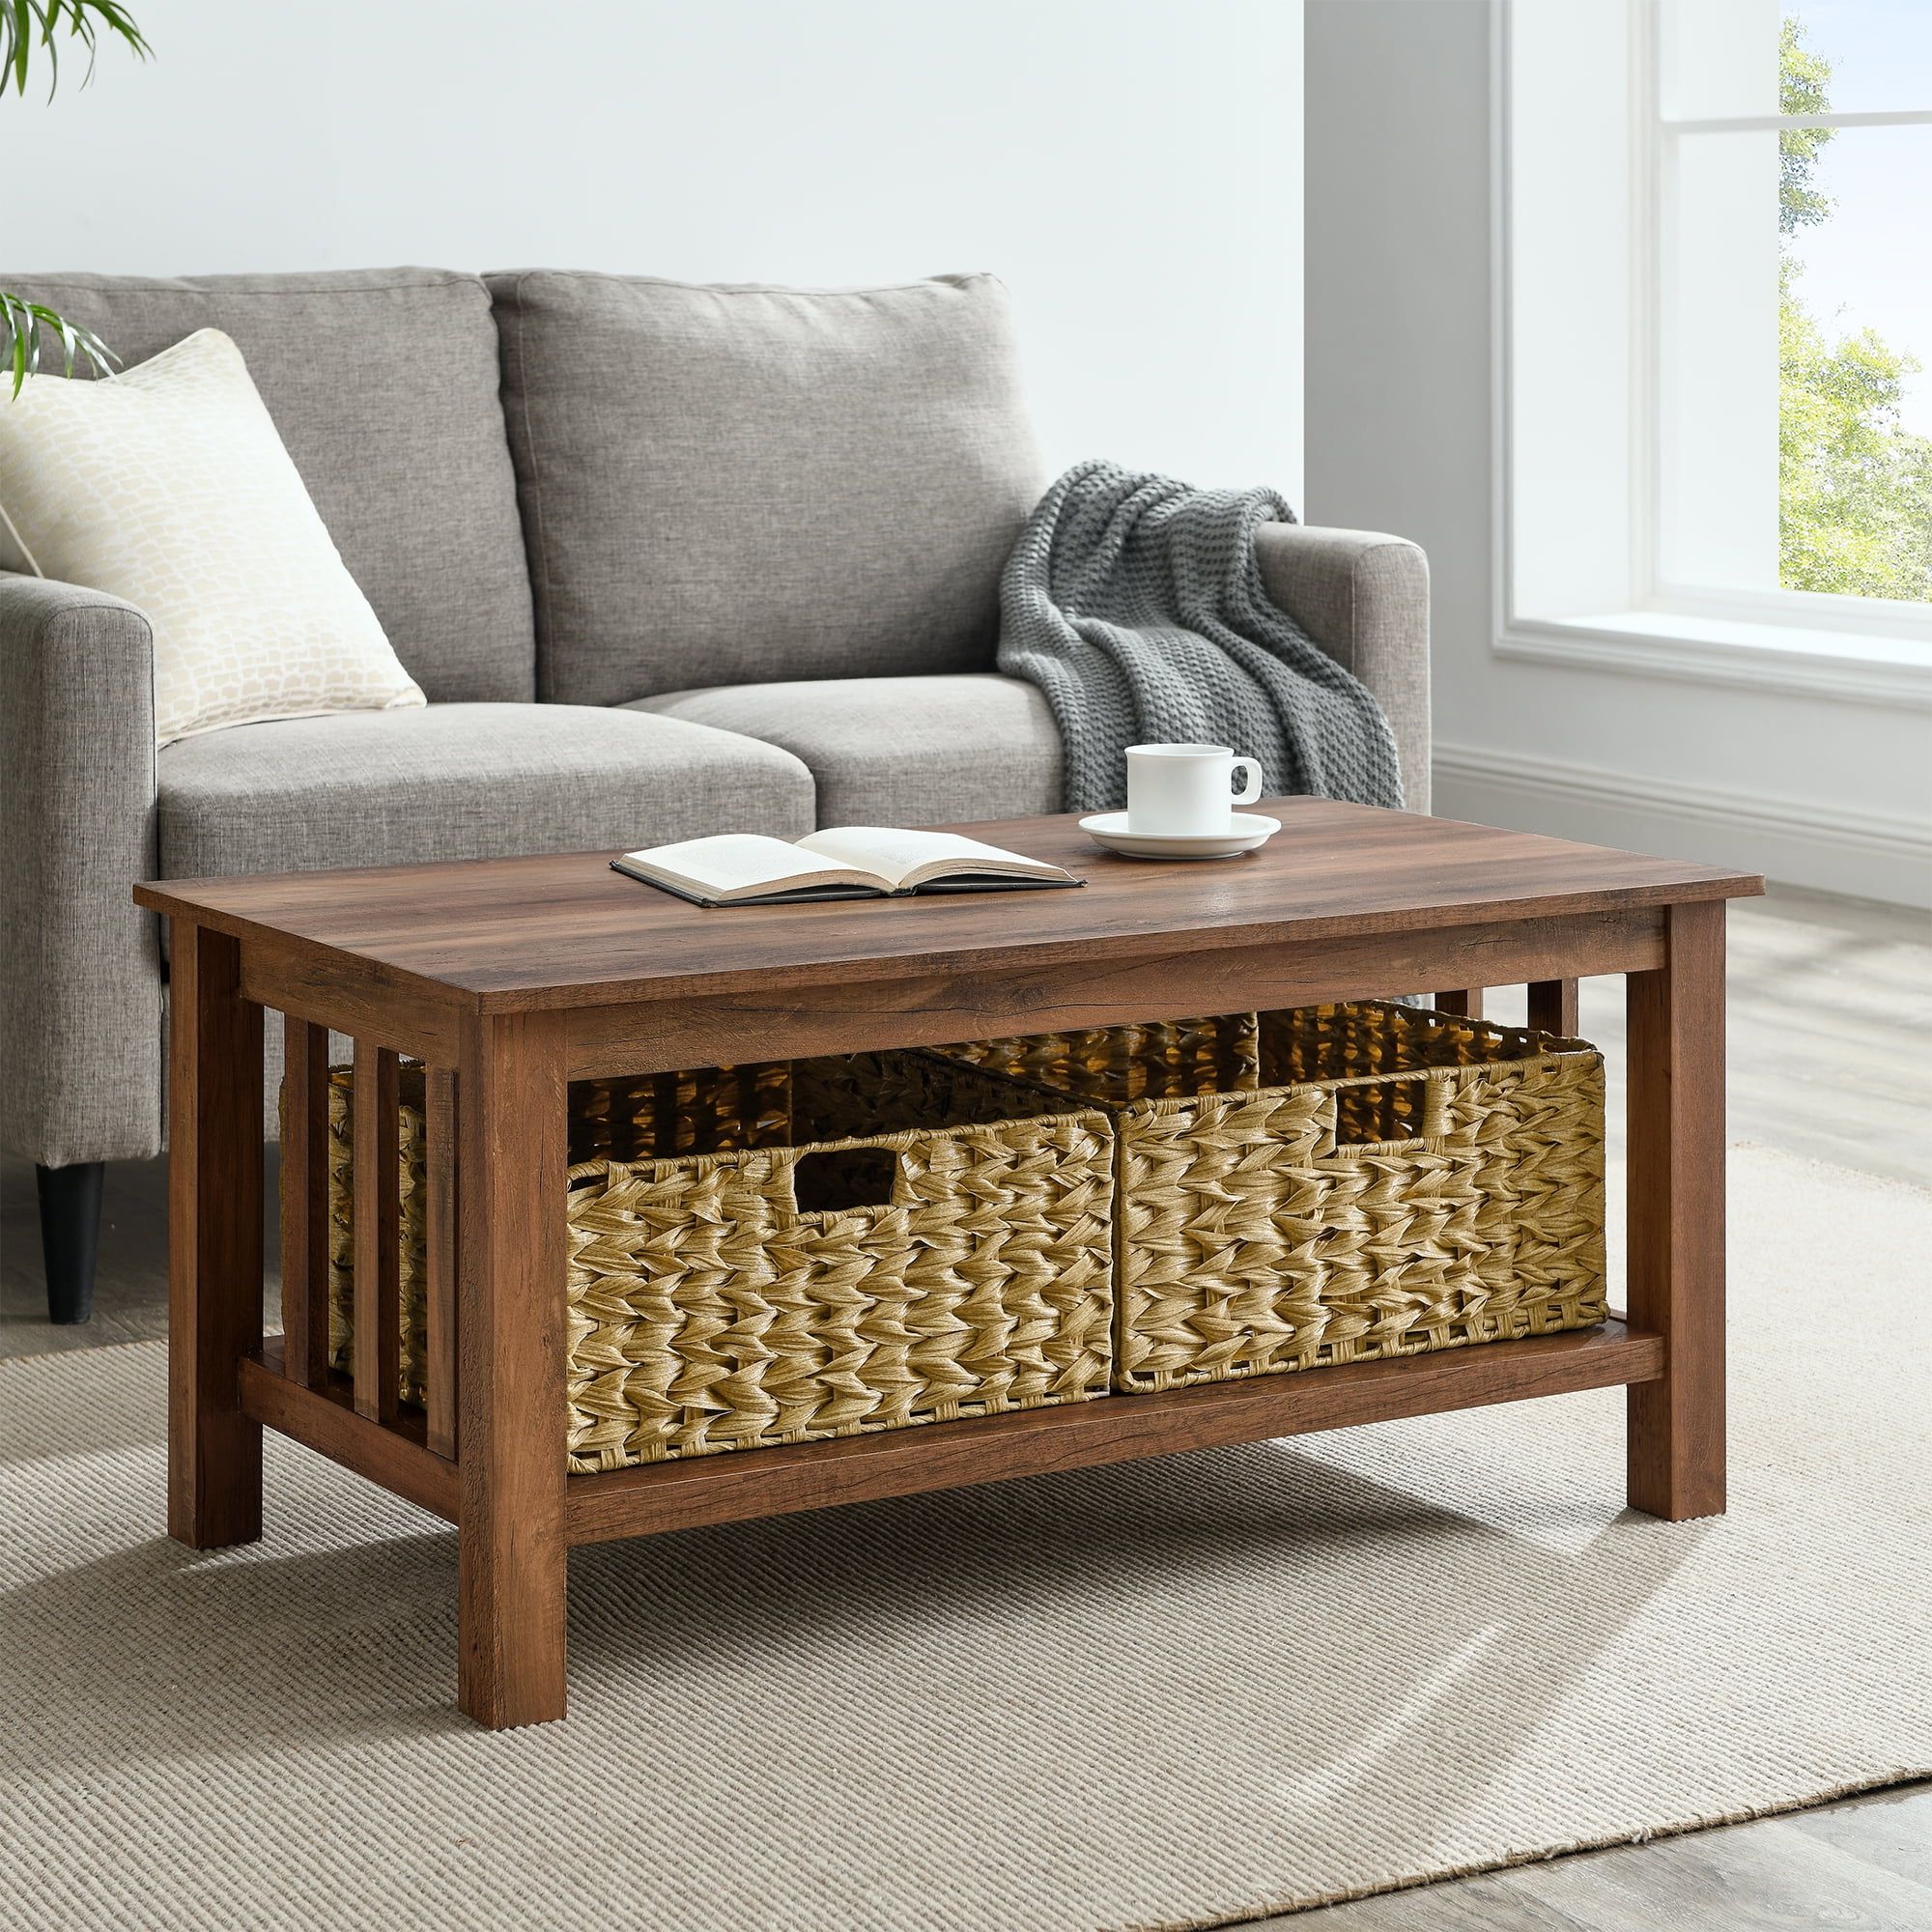 Woven Paths Farmhouse Mission Rectangle Coffee Table With Baskets With Woven Paths Coffee Tables (View 4 of 20)